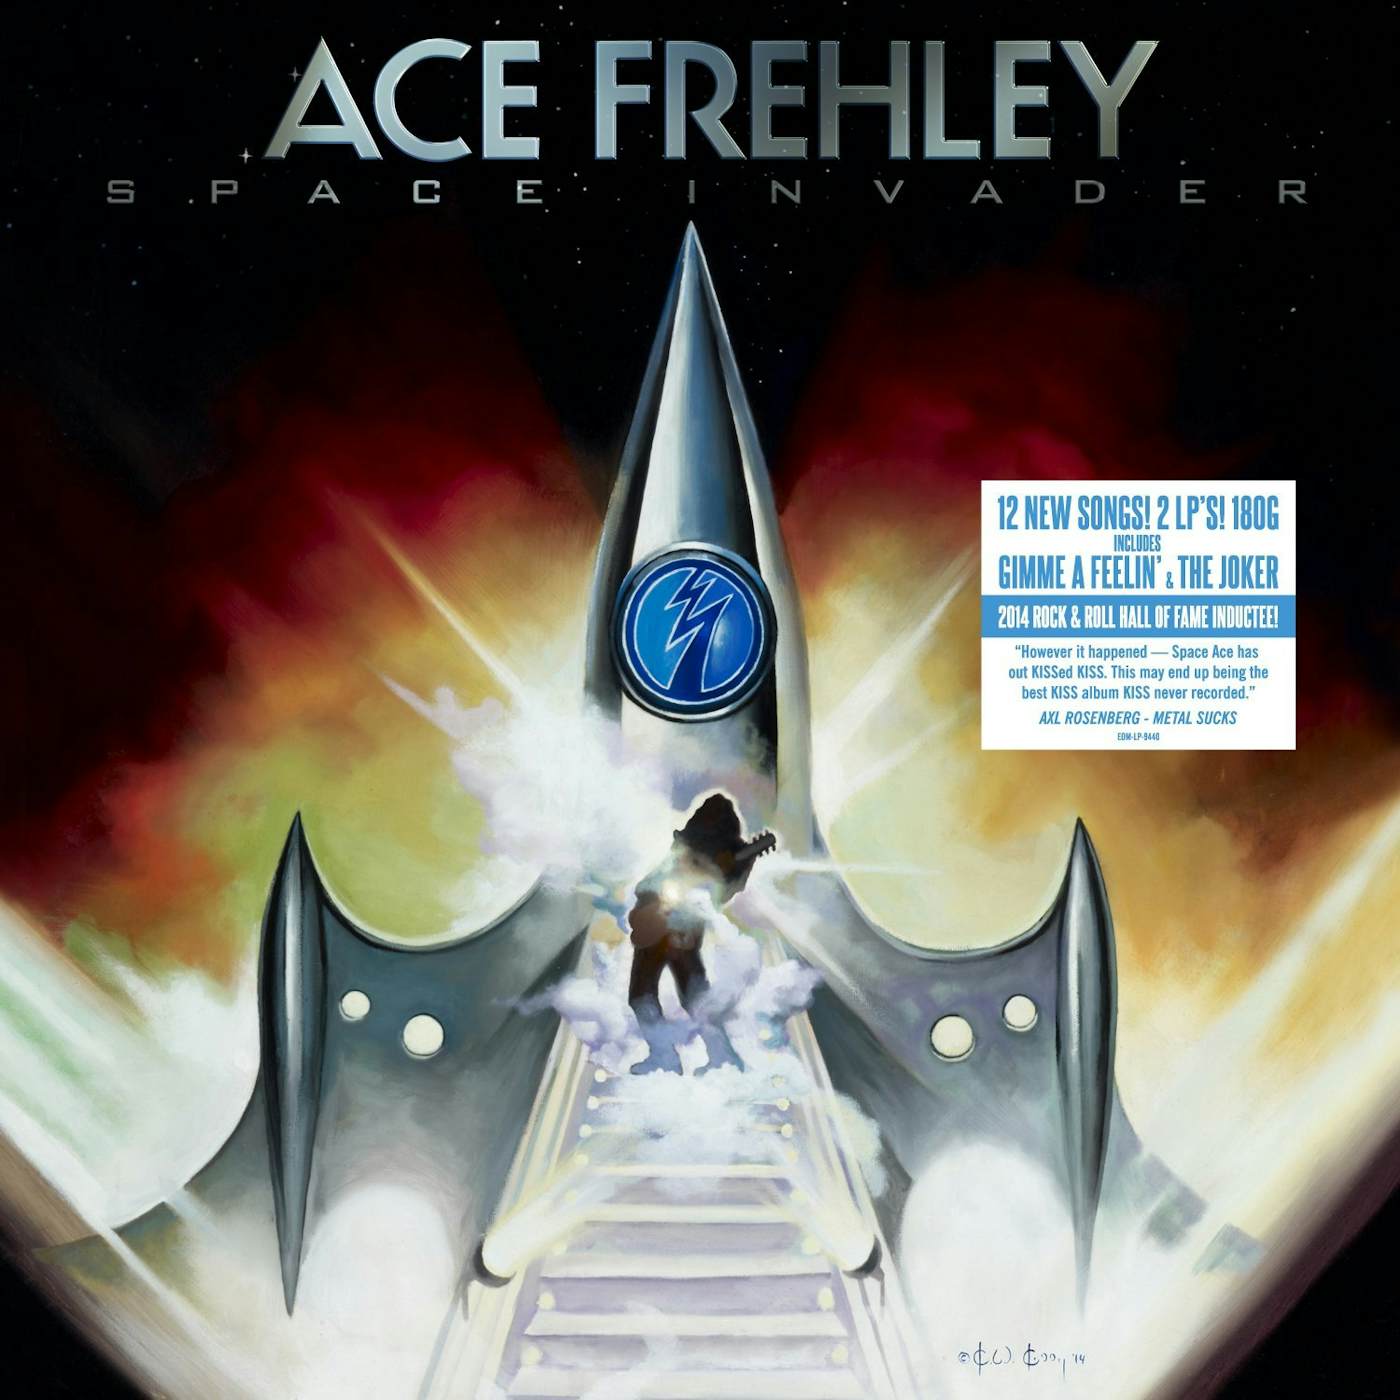 Ace Frehley Space Invader Vinyl Record